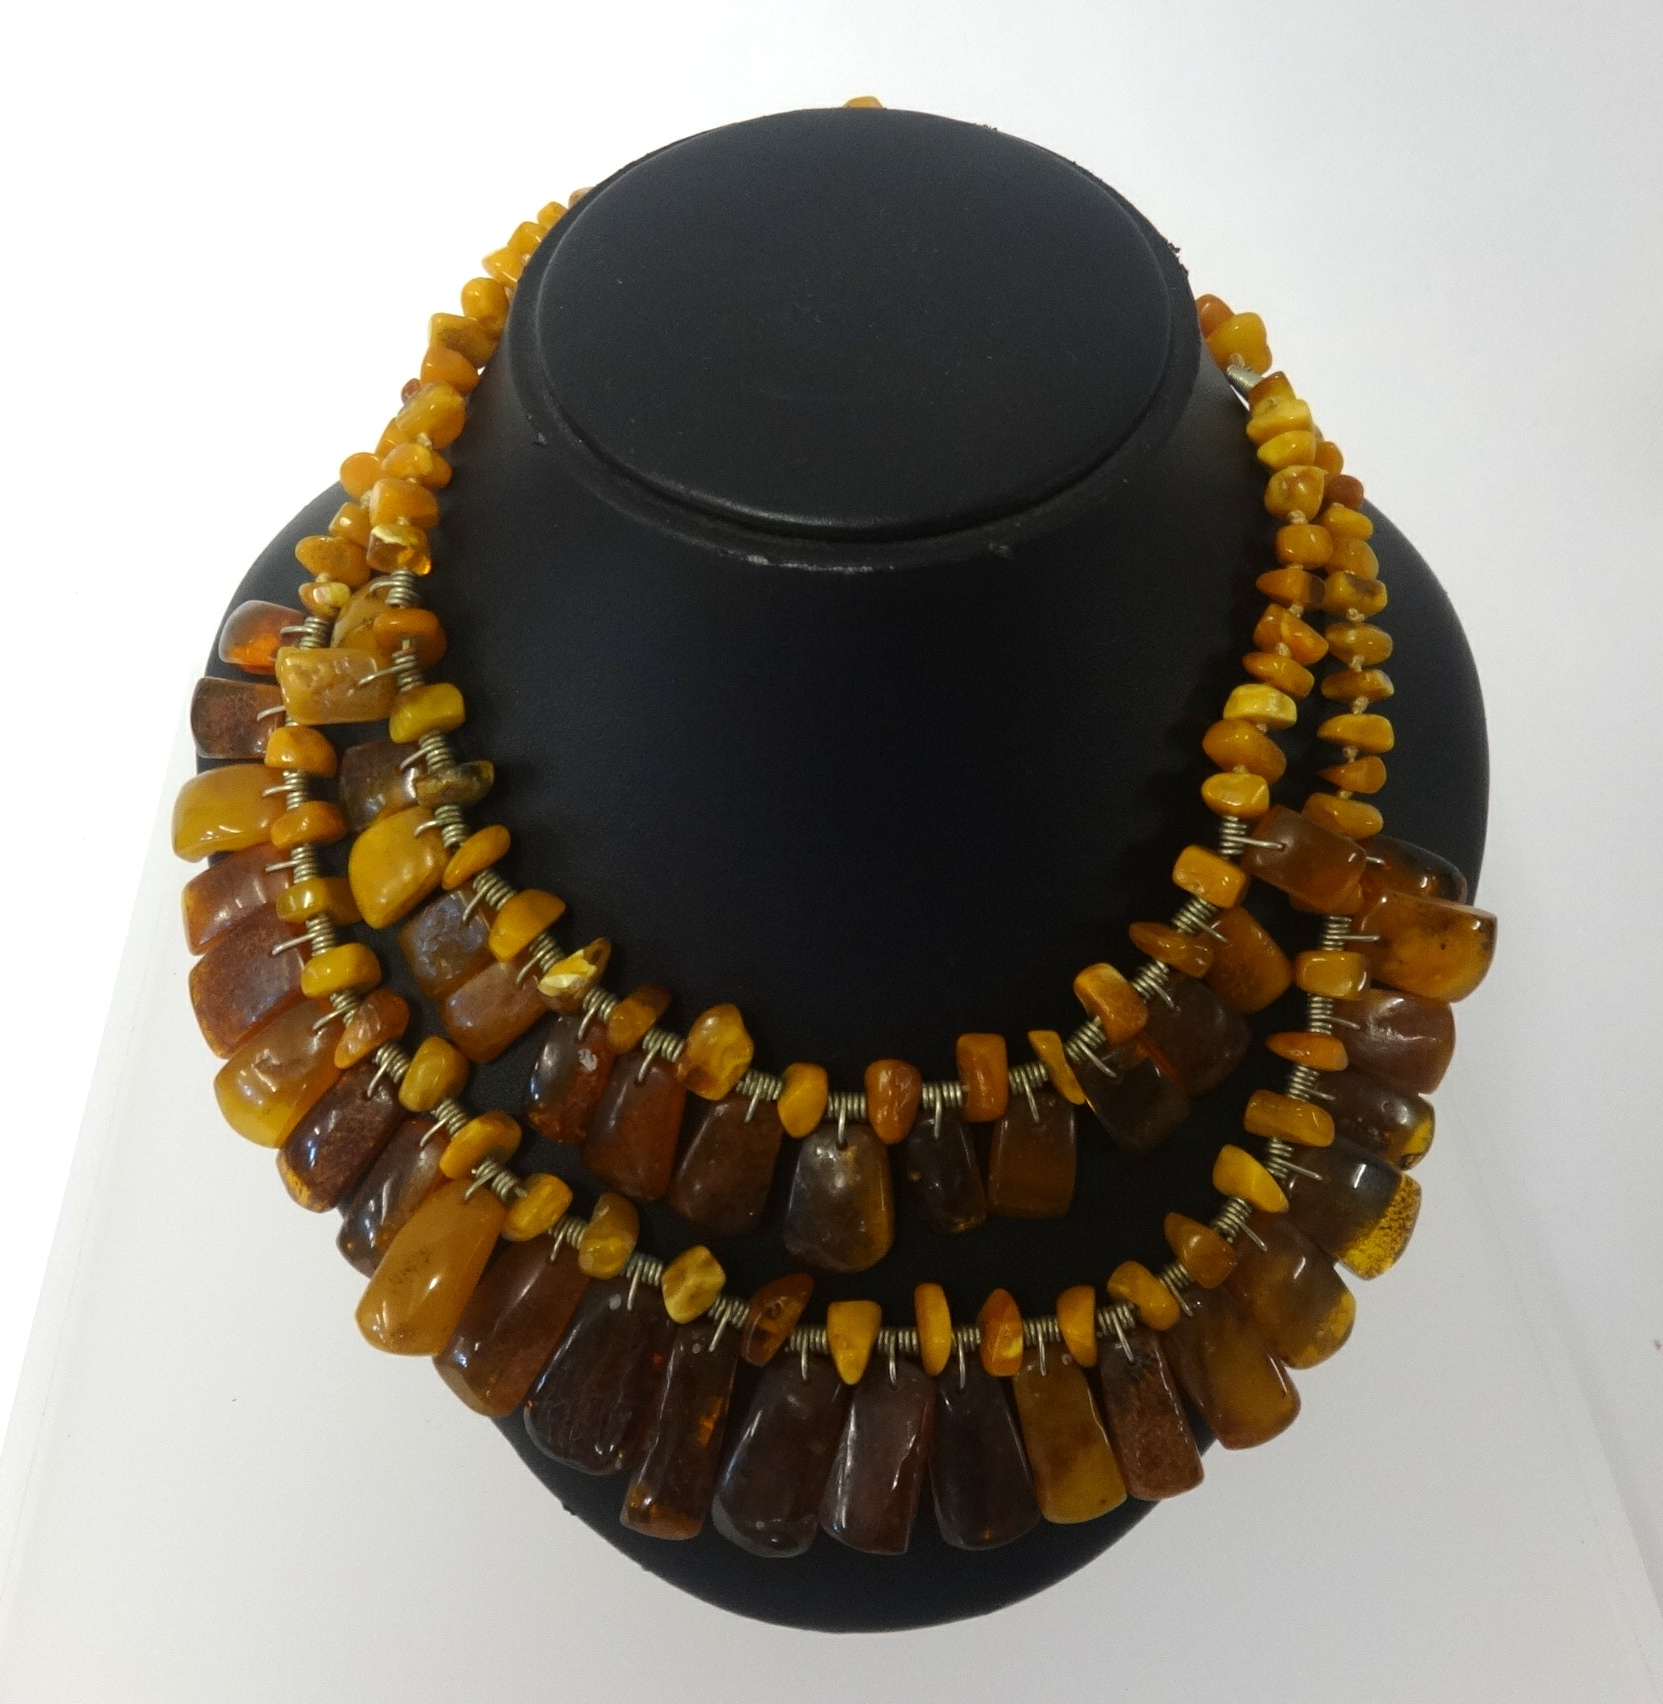 A Baltic amber necklace.